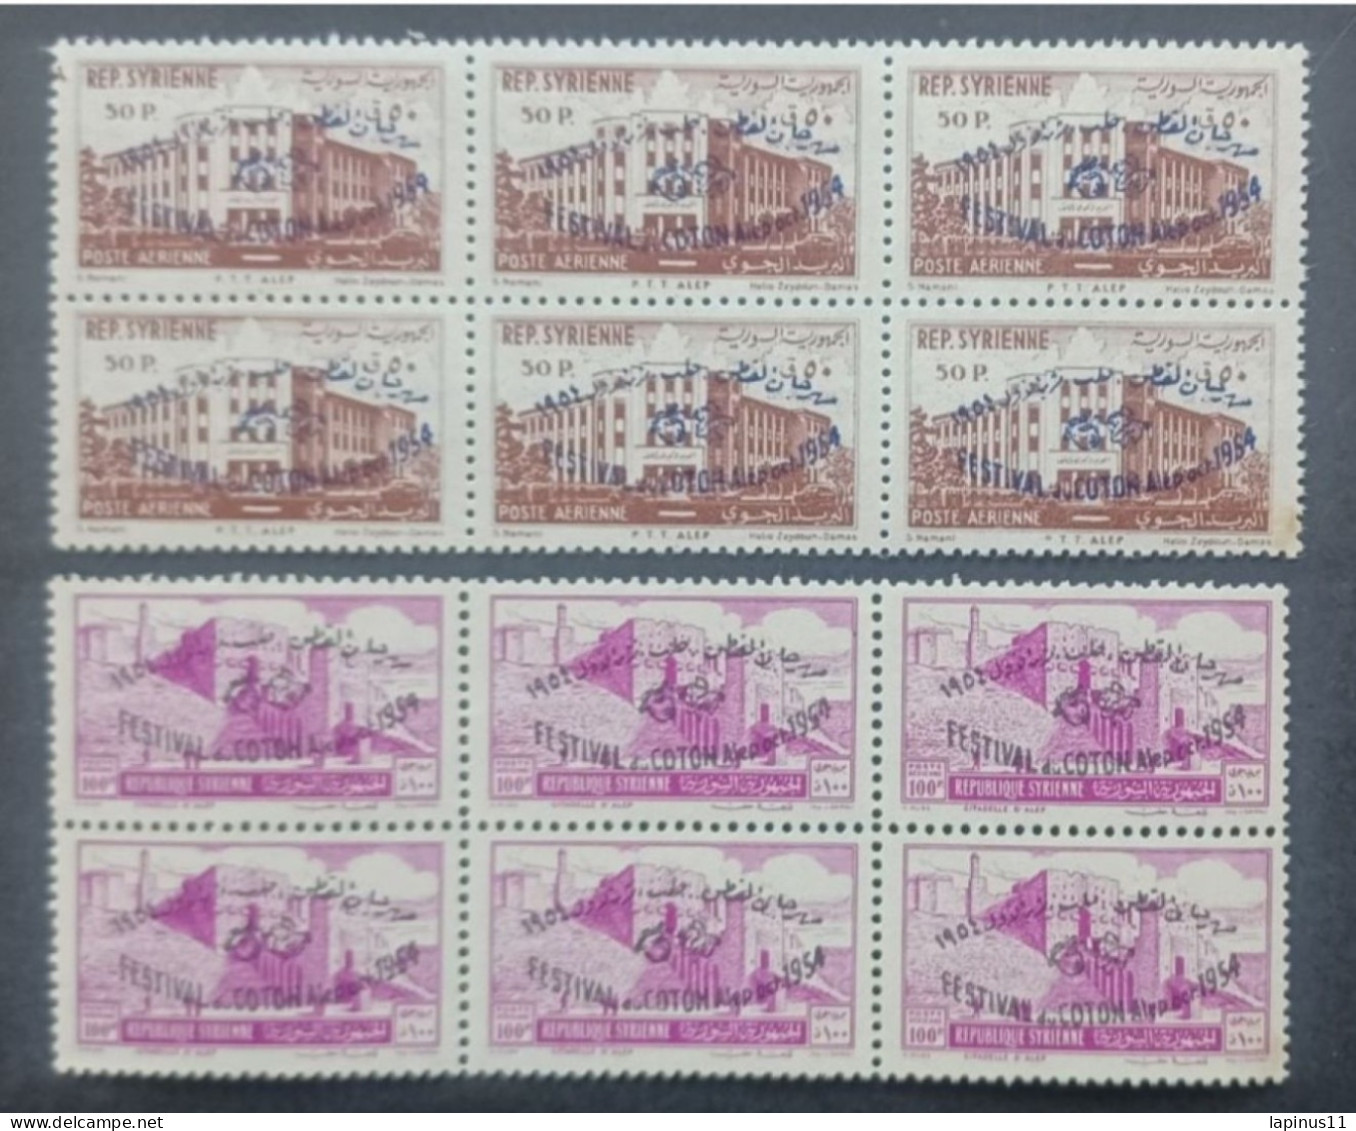 SYRIE سوريا SYRIA 1954 AIRMAIL COTTON FESTIVAL CAT YVERT N 54/55 - Syrie